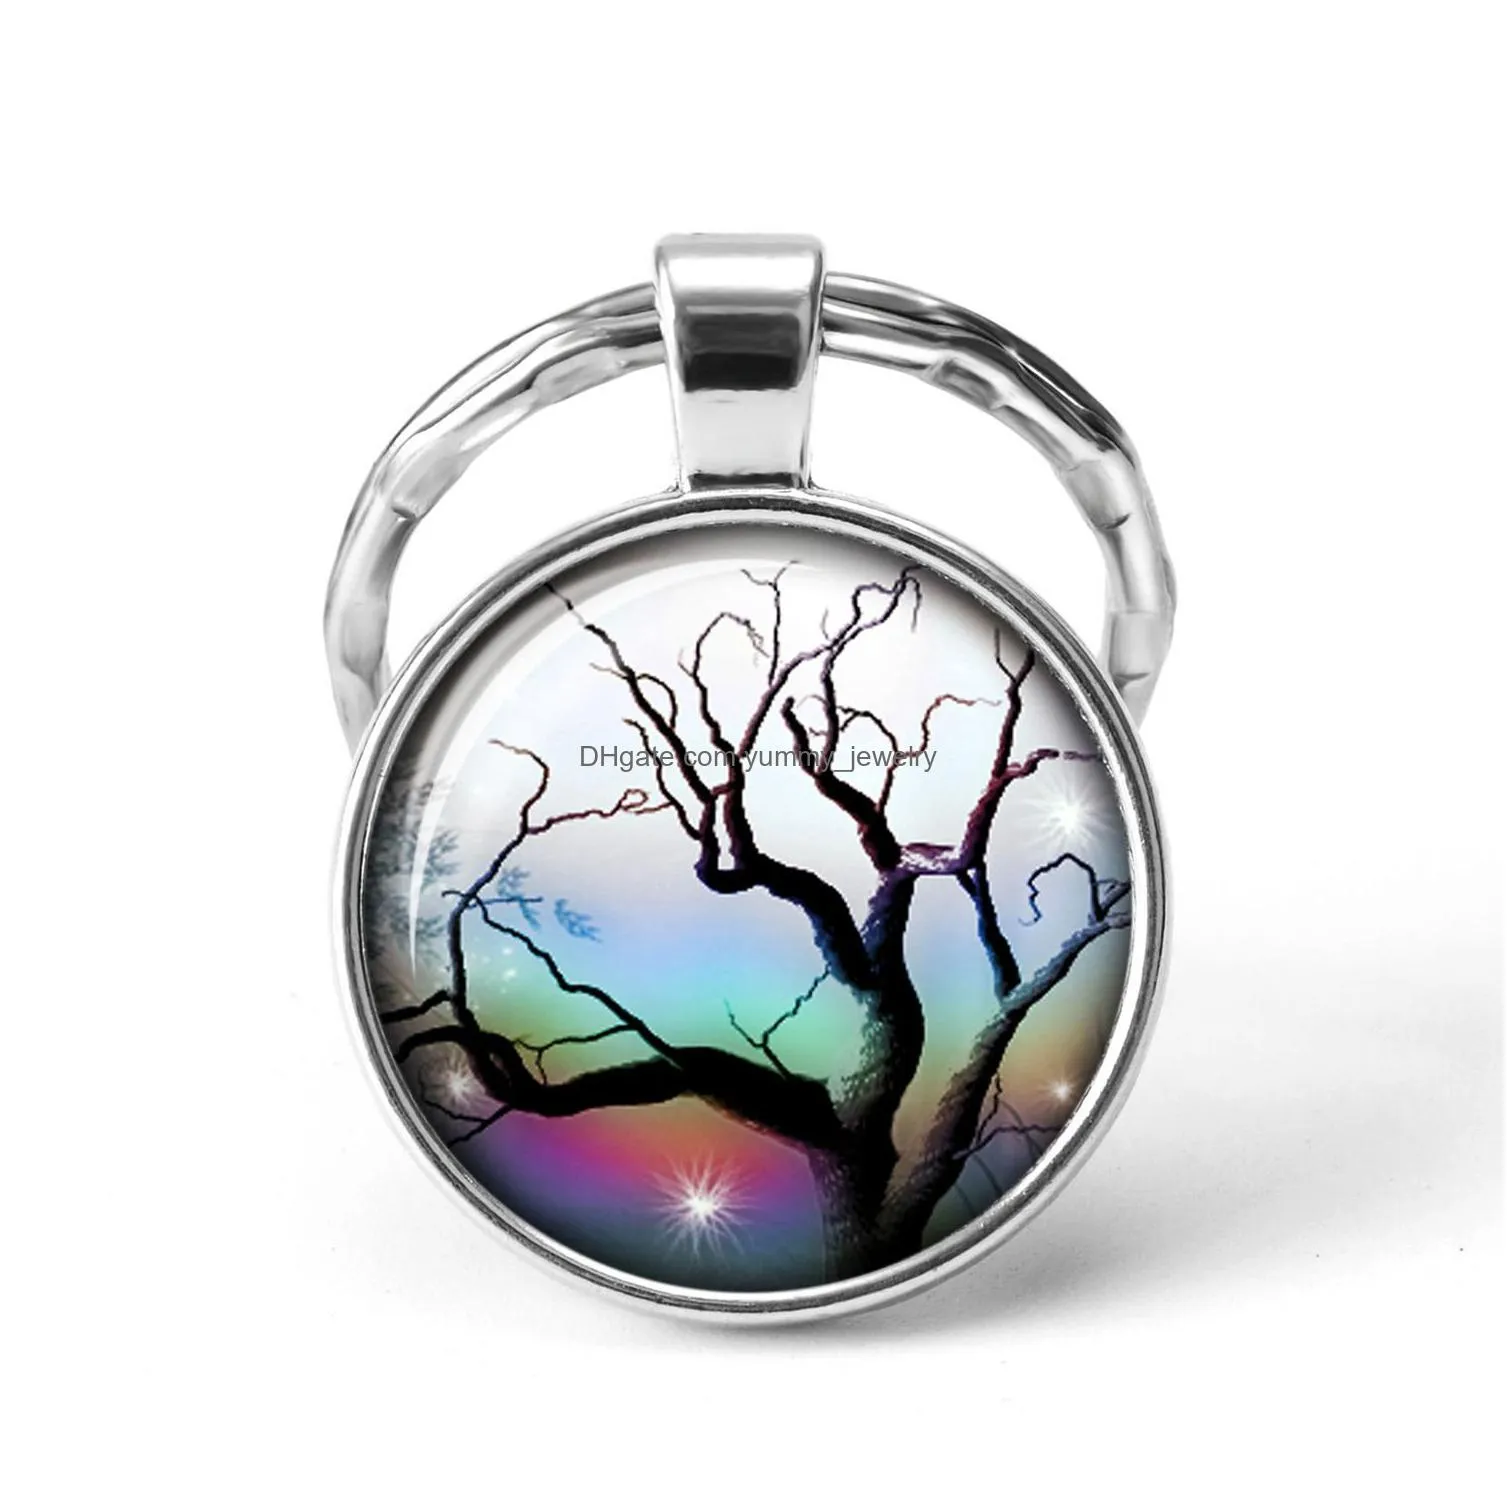 new fashion design tree of life key chains handmade glass dome natural creature keyring creative divergent christmas gift